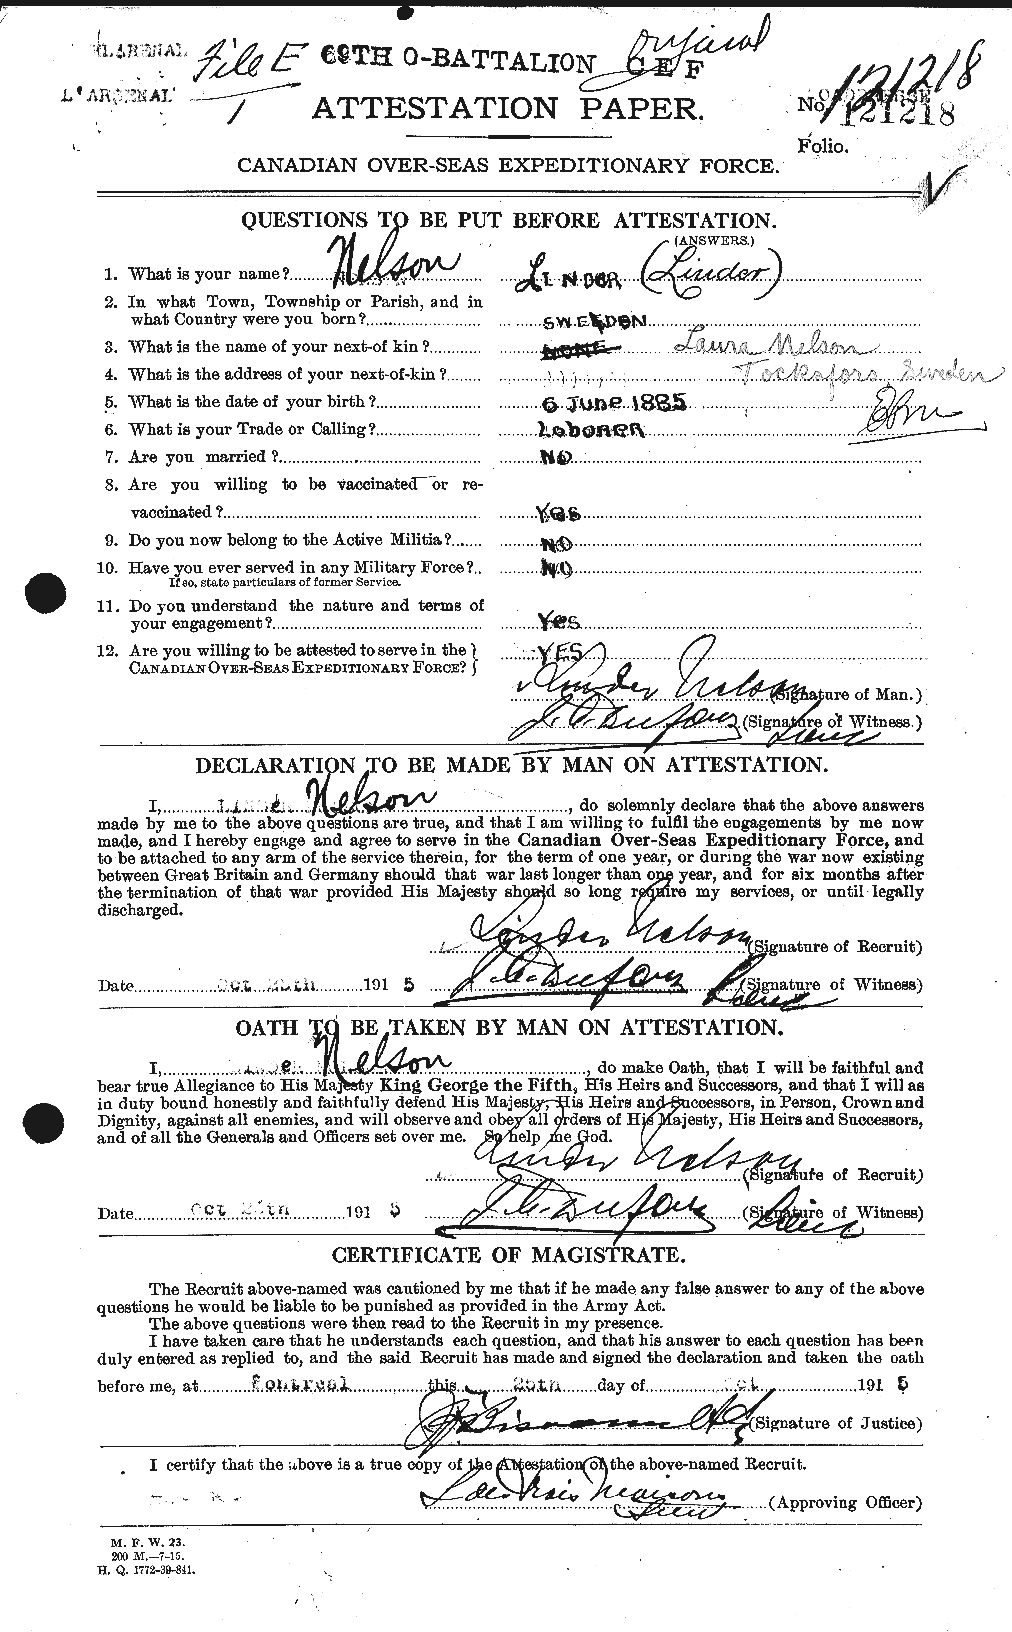 Personnel Records of the First World War - CEF 545344a